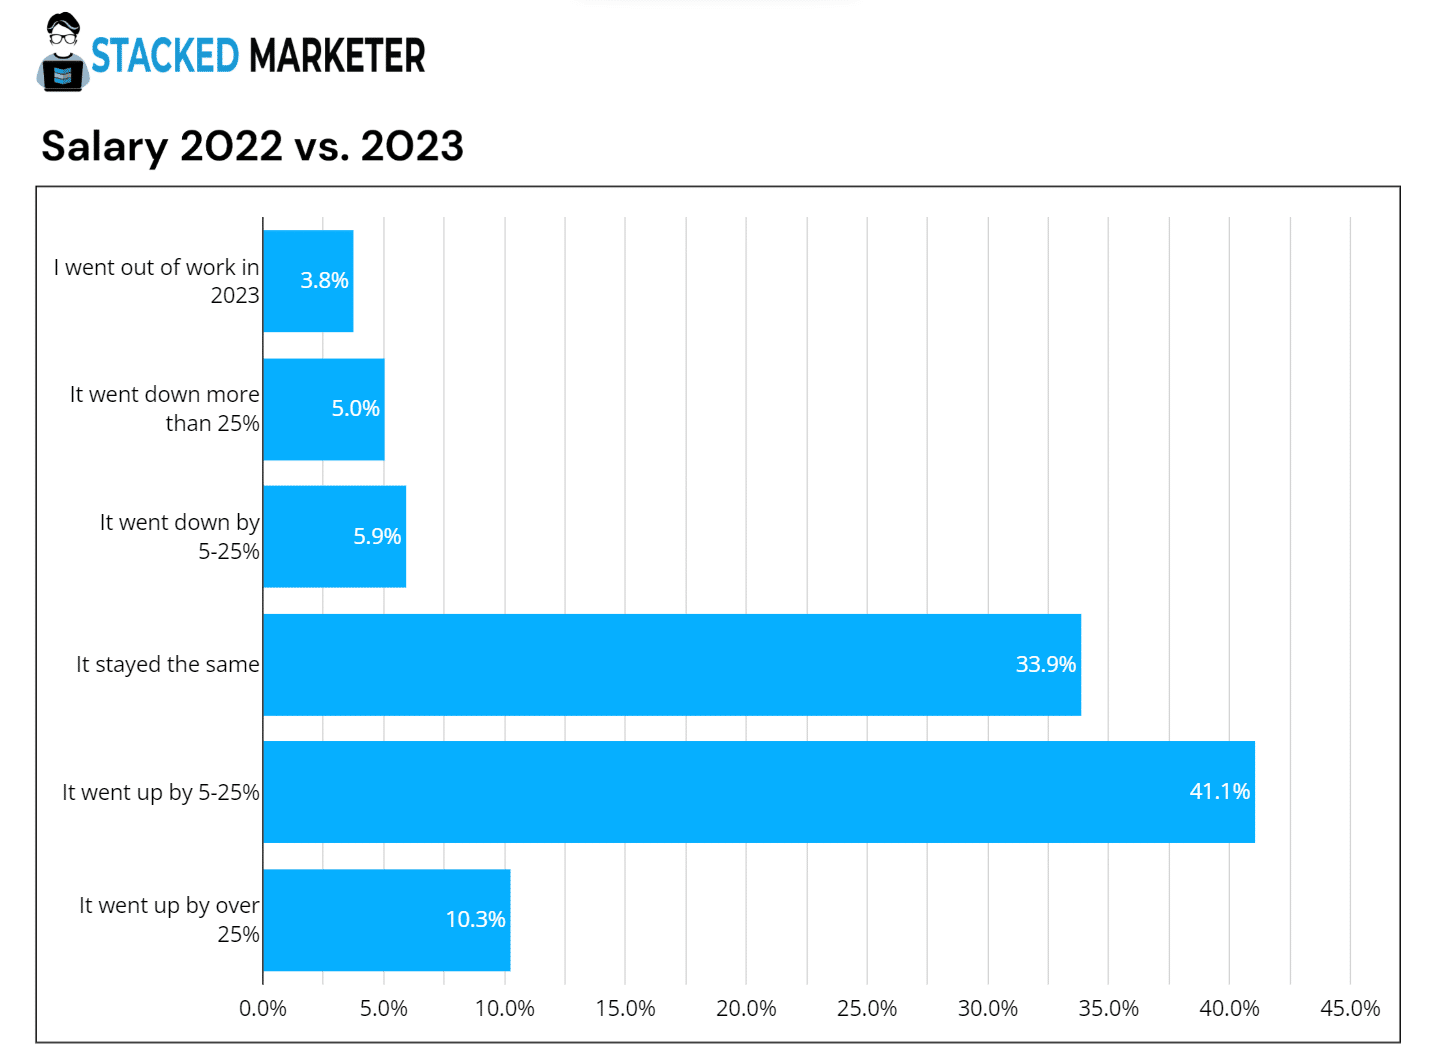 how did marketers salaries changed in 2023 compared to 2023?